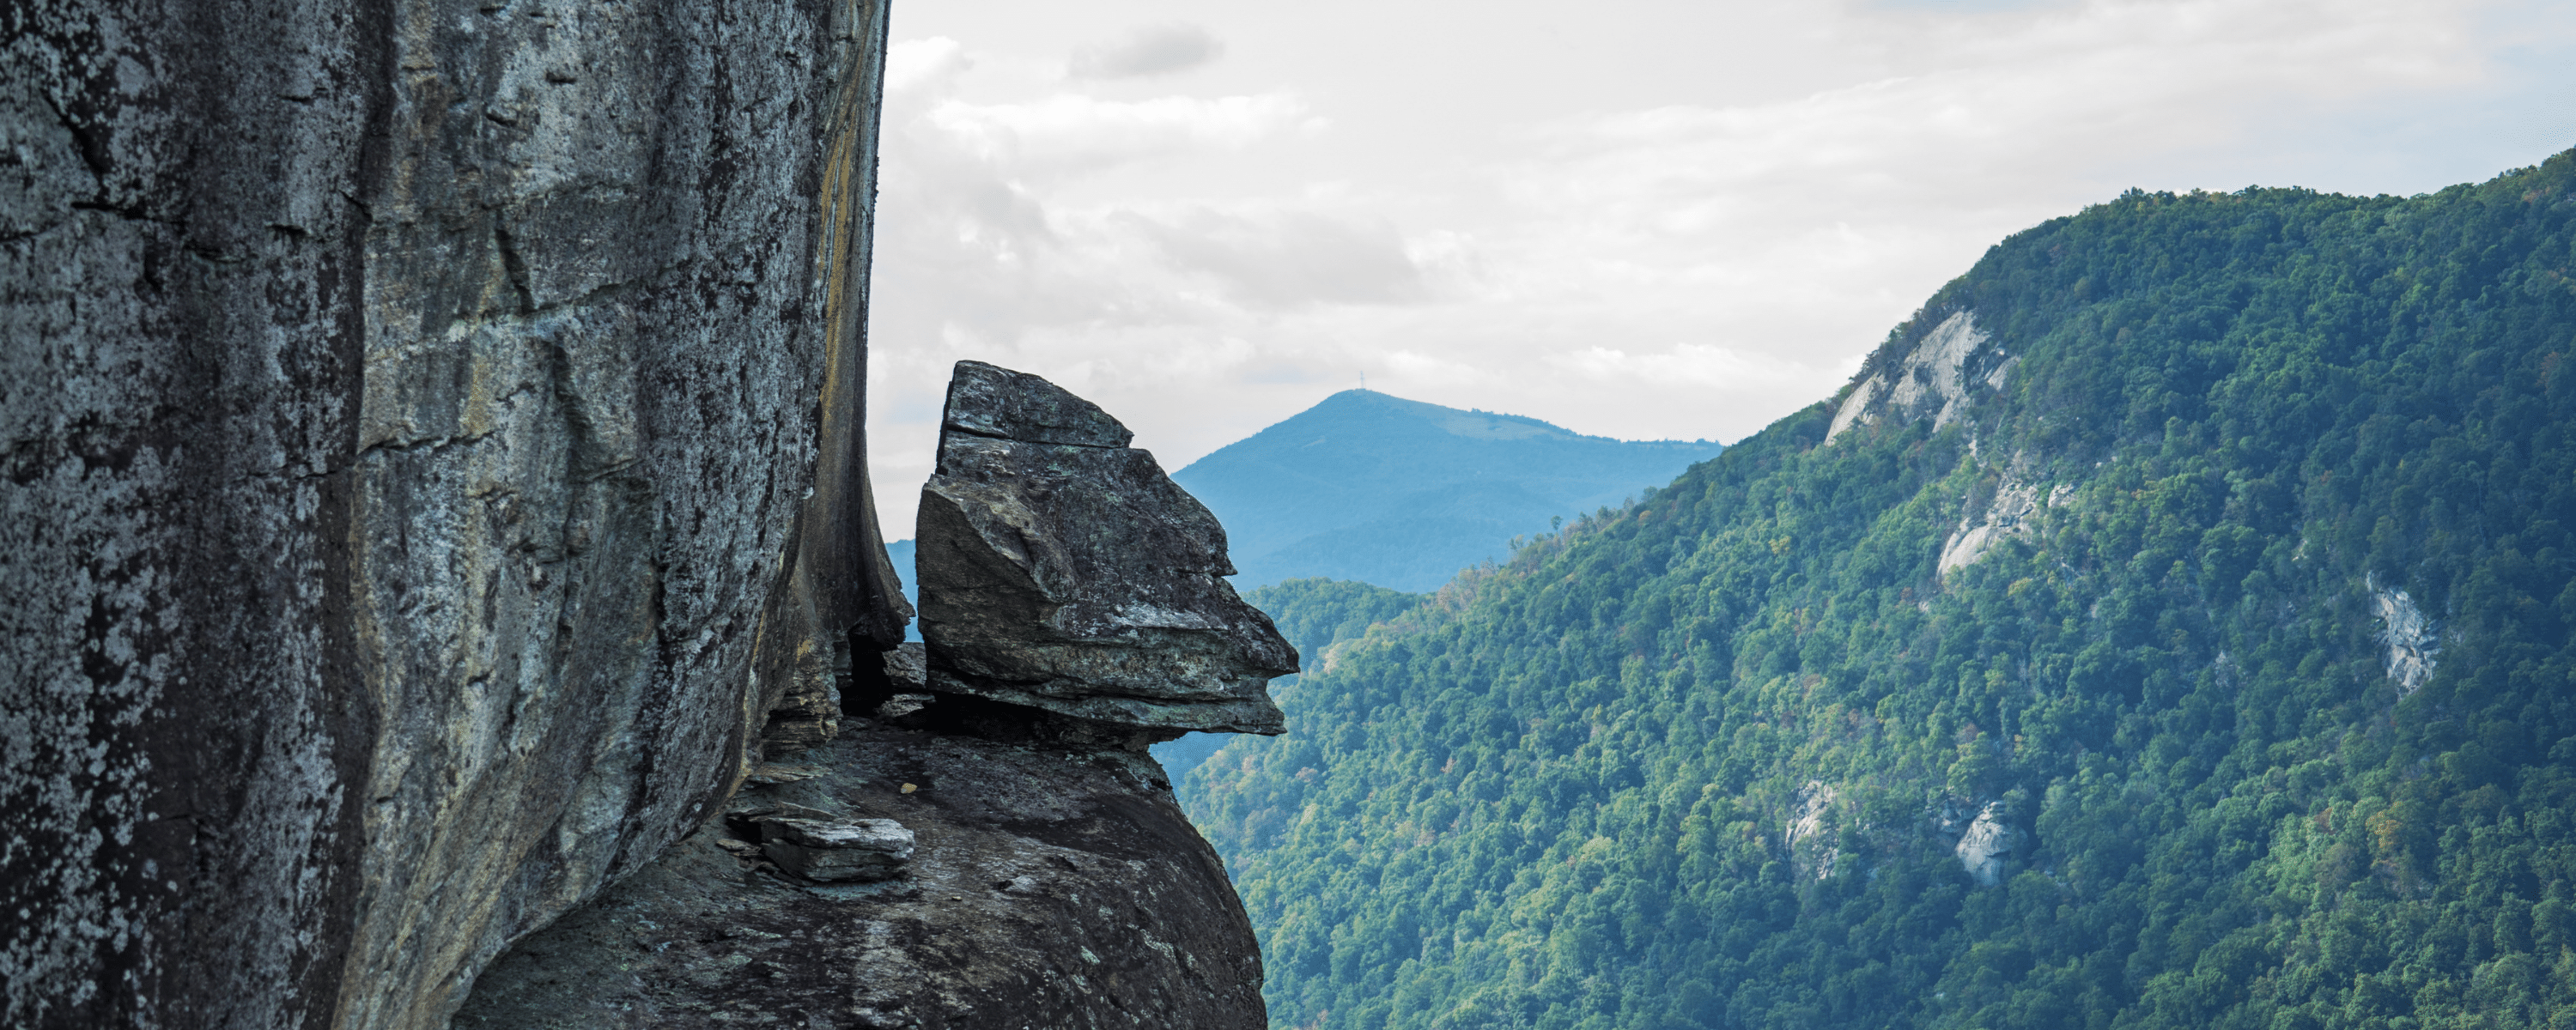 The Scenic Route: A Day Trip from Asheville to Chimney Rock